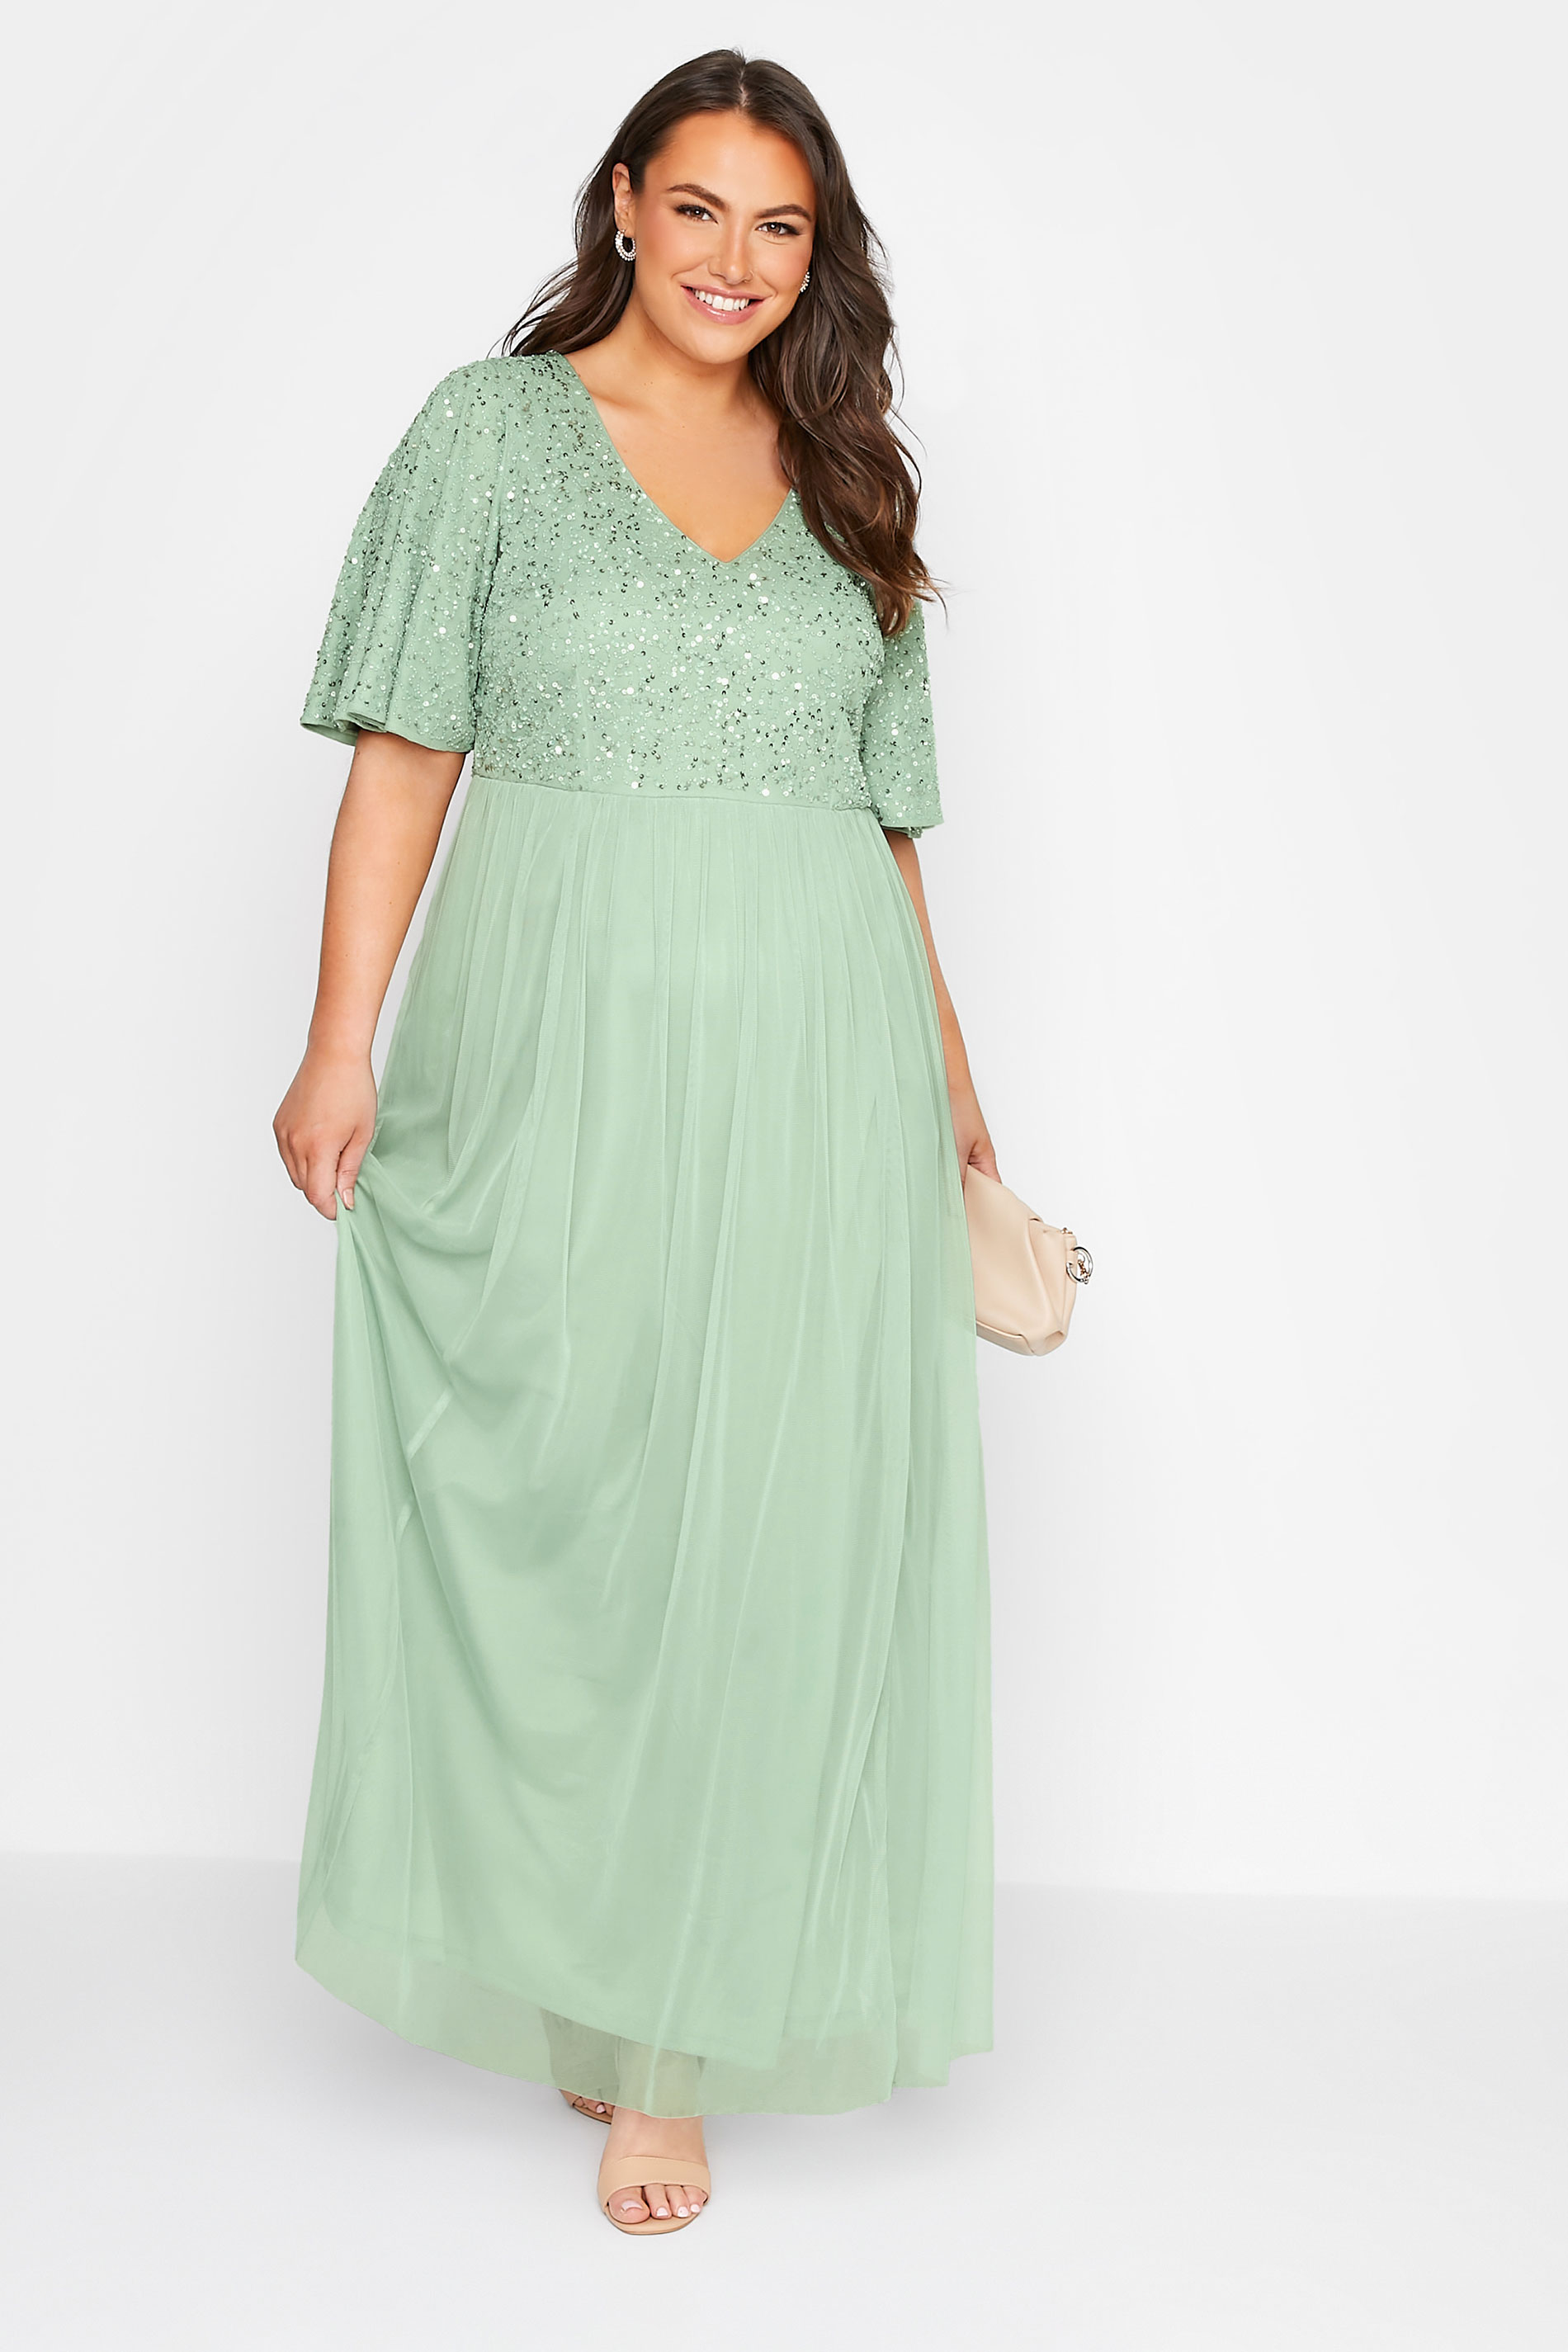 LUXE Plus Size Sage Green Sequin Embellished Dress | Yours Clothing